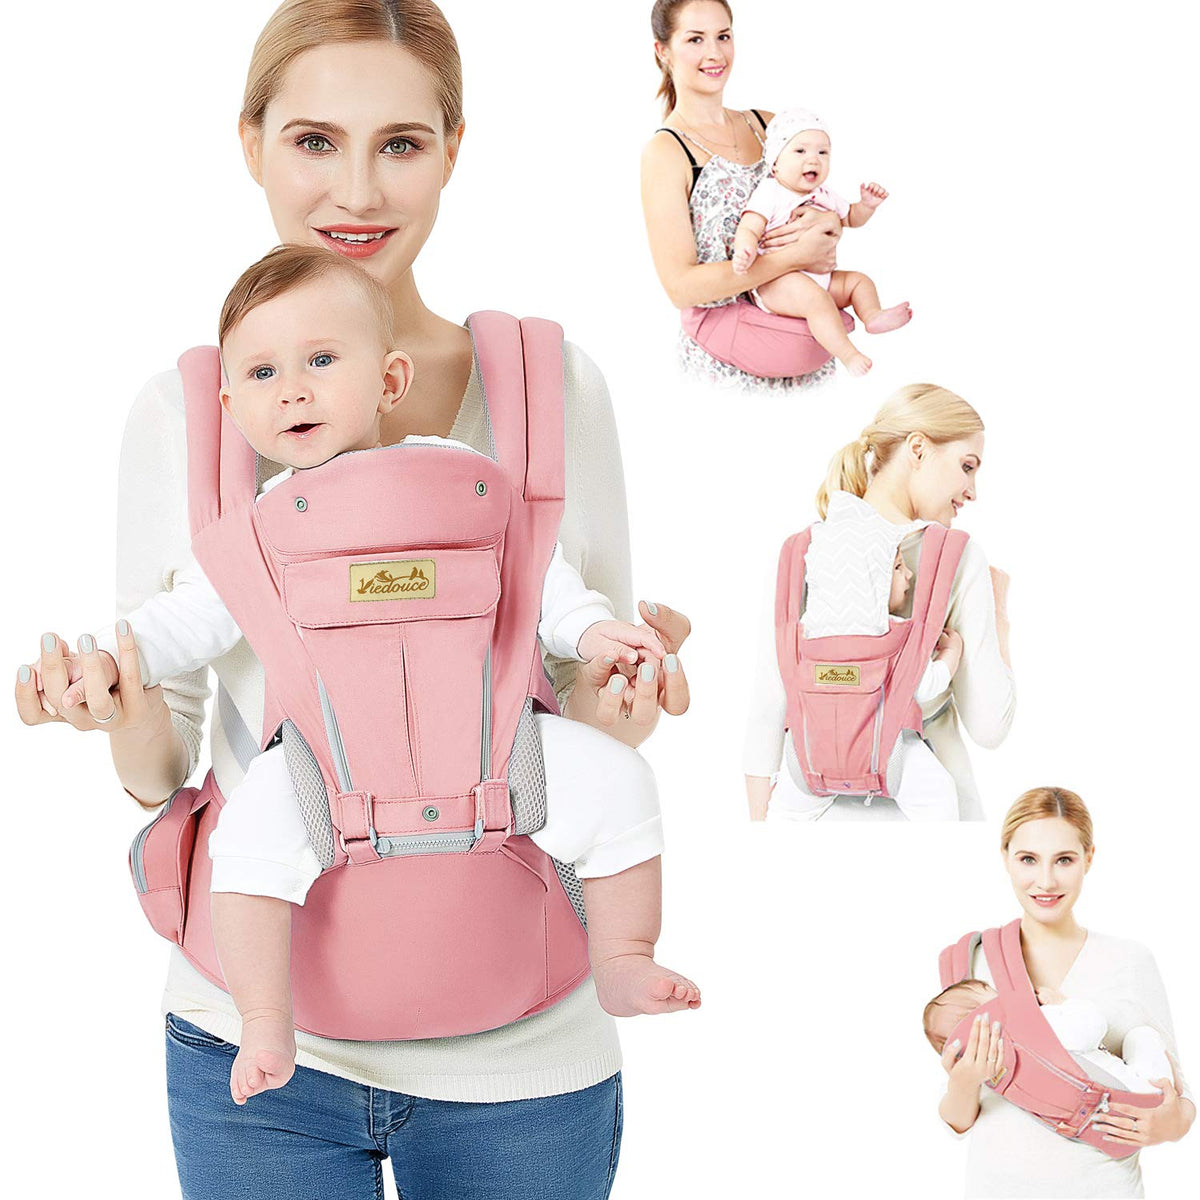 Viedouce Baby Carrier Ergonomic with Hip Seat/Pure Cotton Lightweight and Breathable/Multiposition:Dorsal, Ventral, Adjustable for Newborn and Toddler 3 to 48 Month (3.5 to 20 kg)